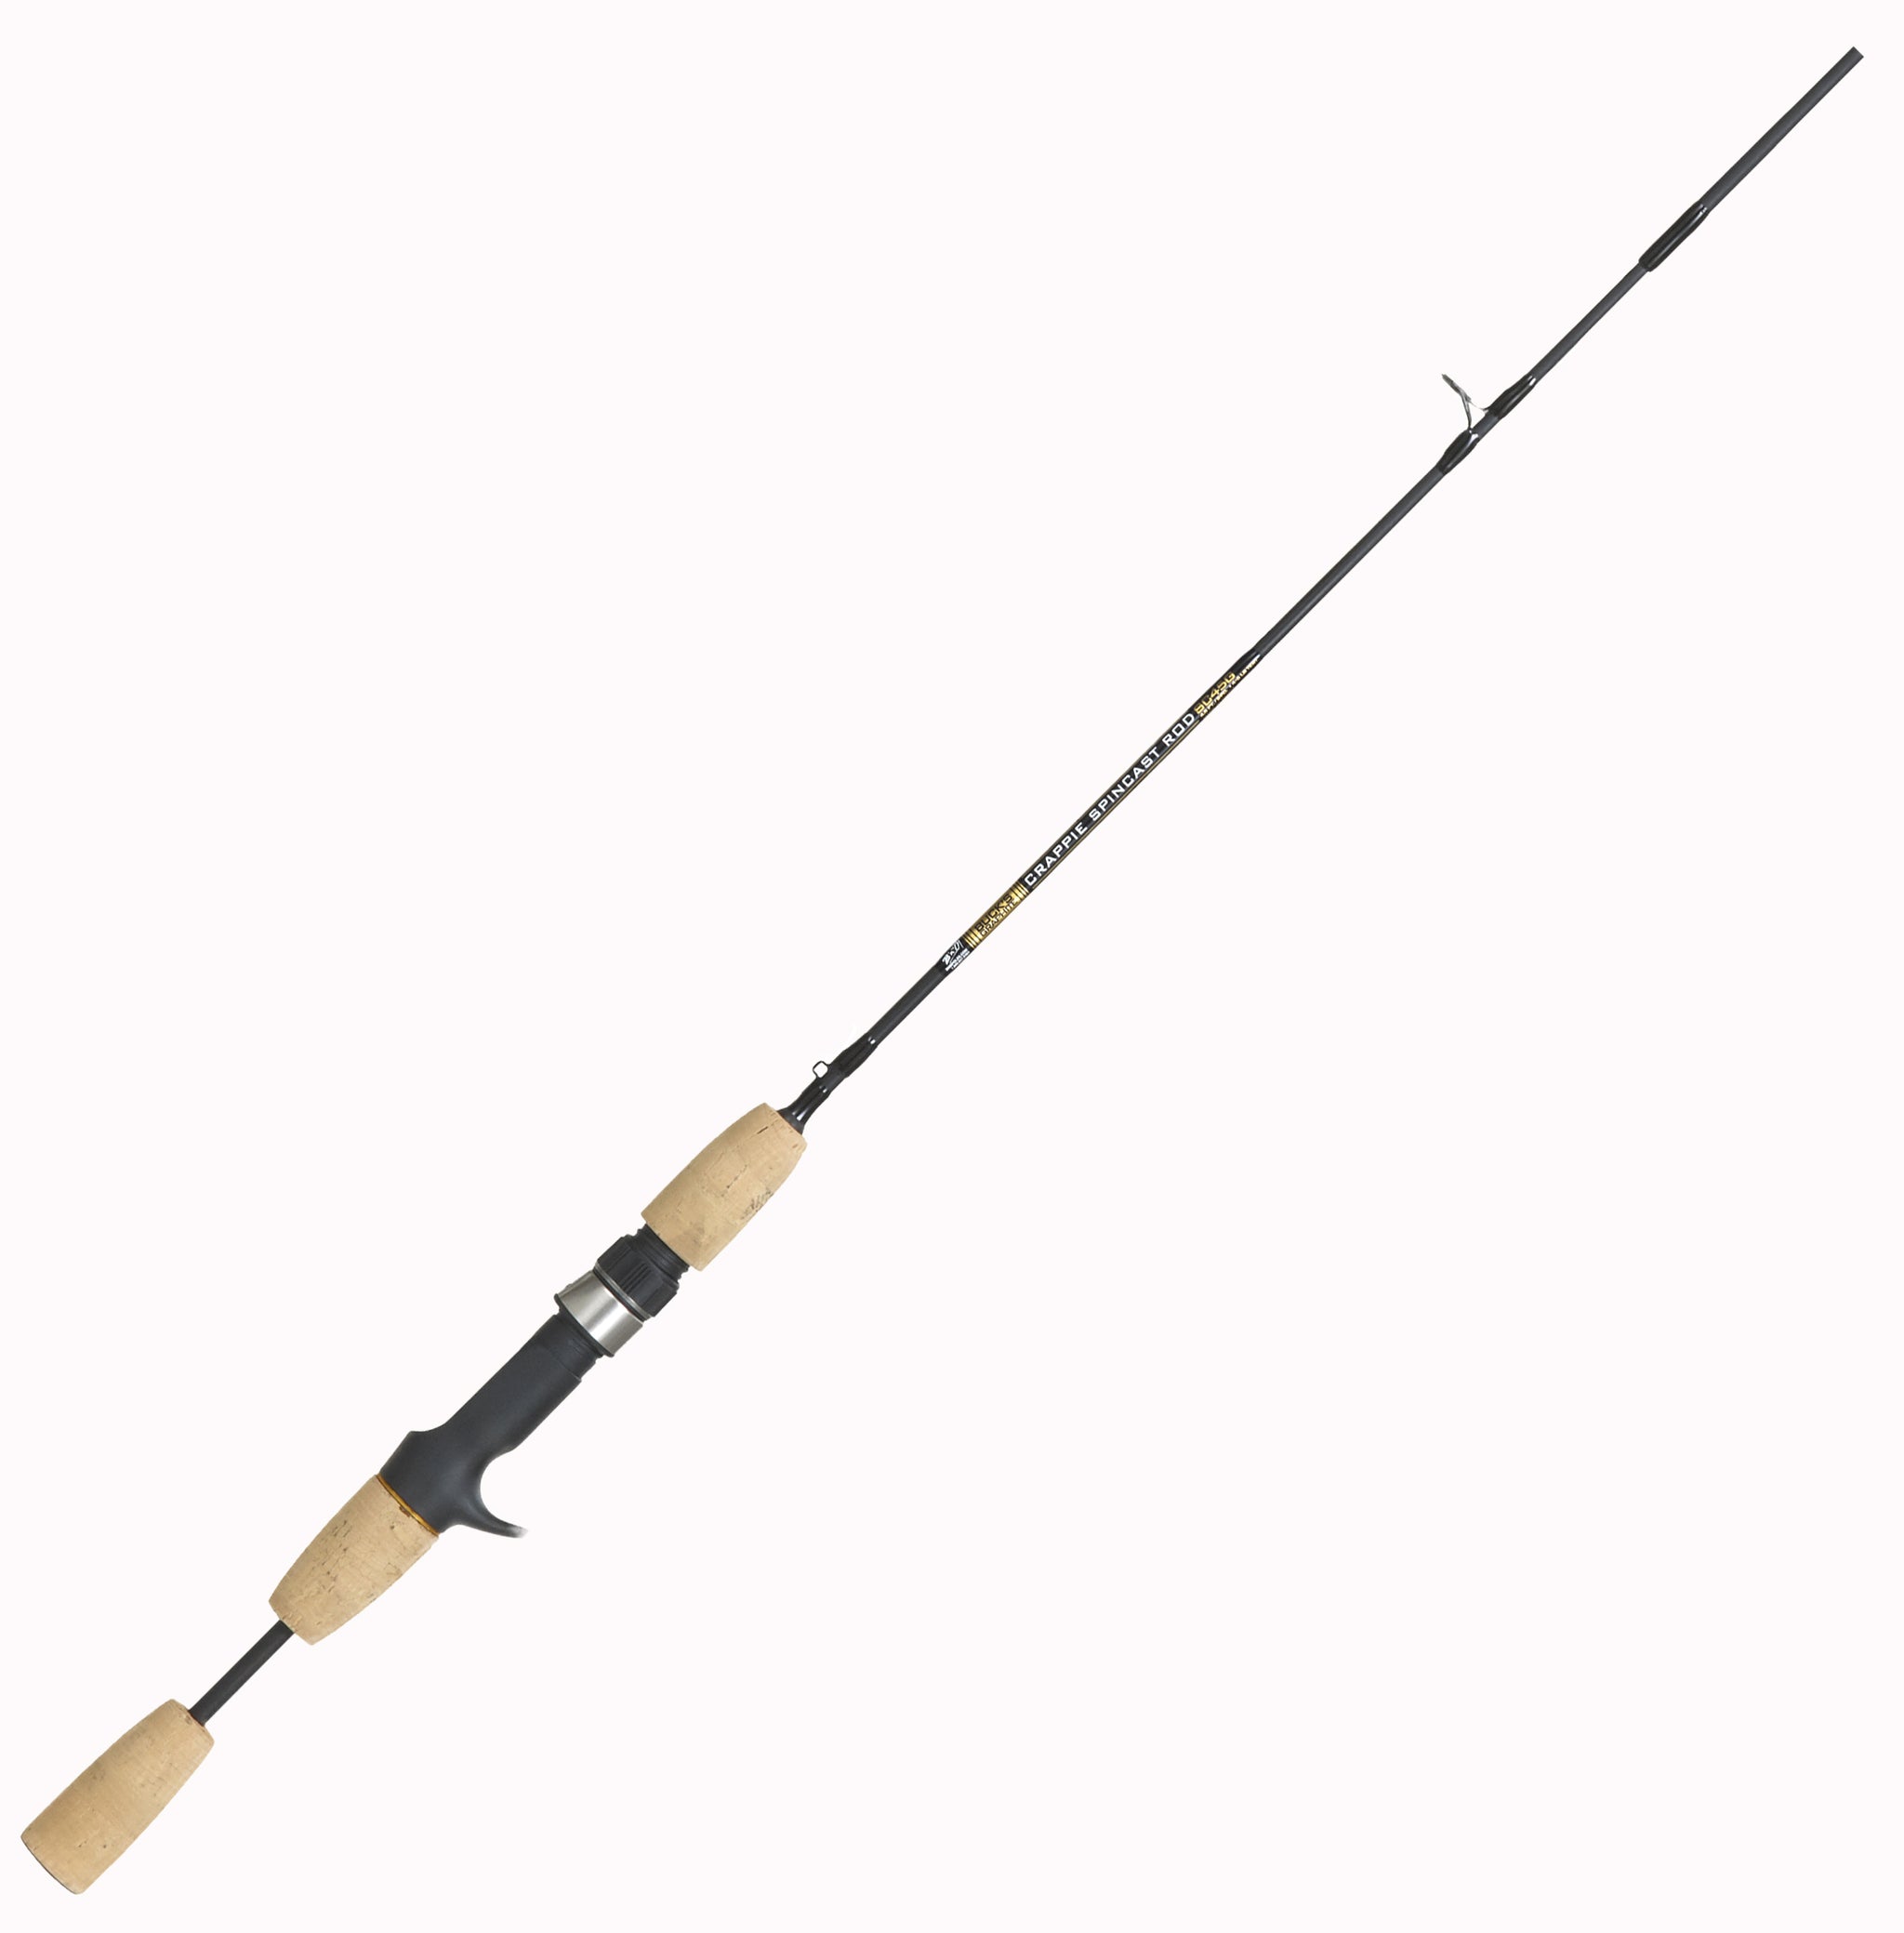 New Product replaceable fishing rod cork